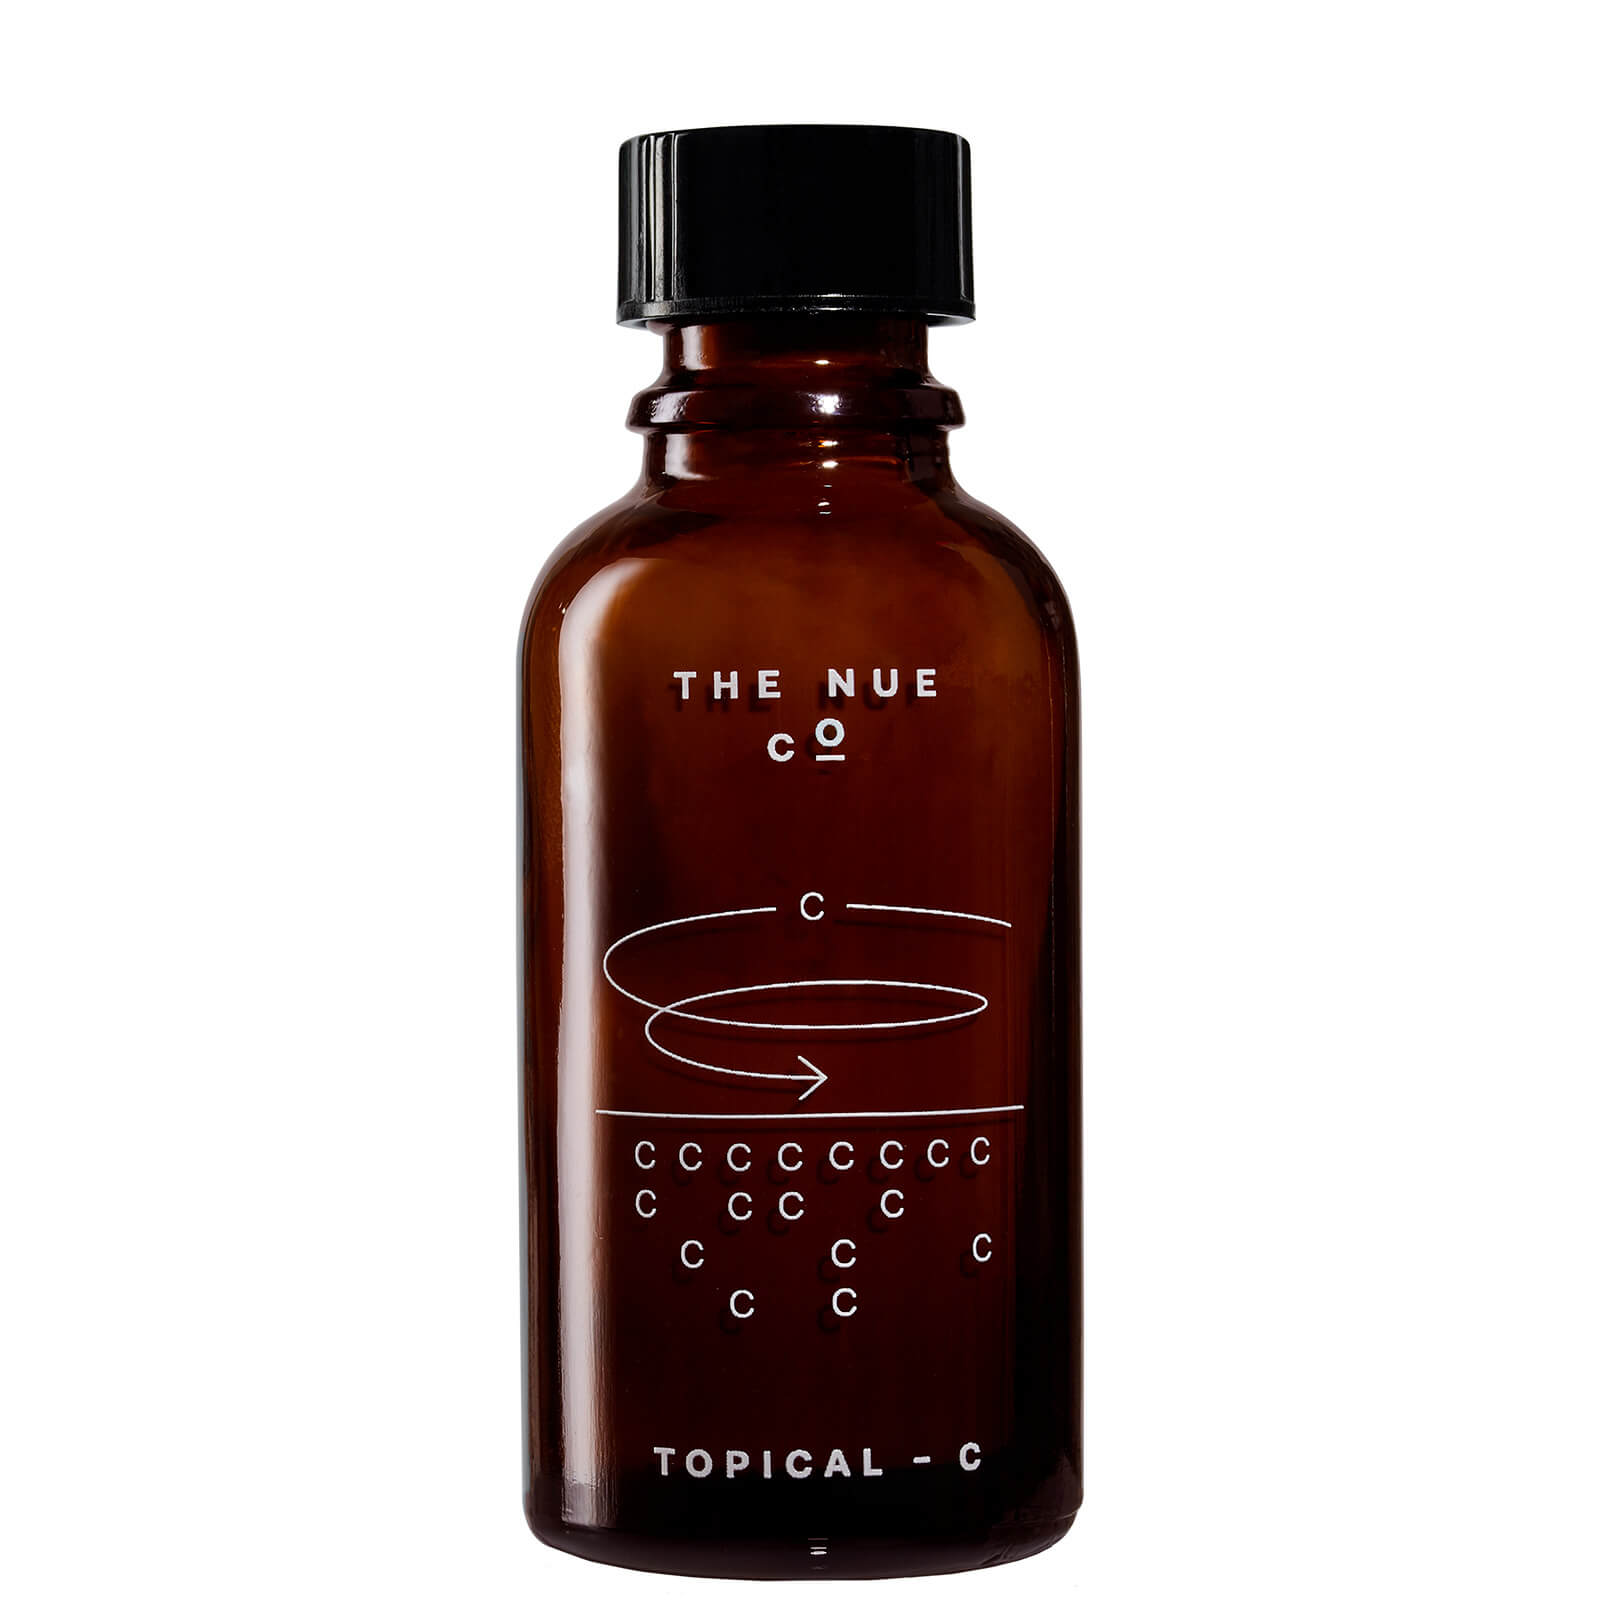 The Nue Co Topical-c 15ml In White